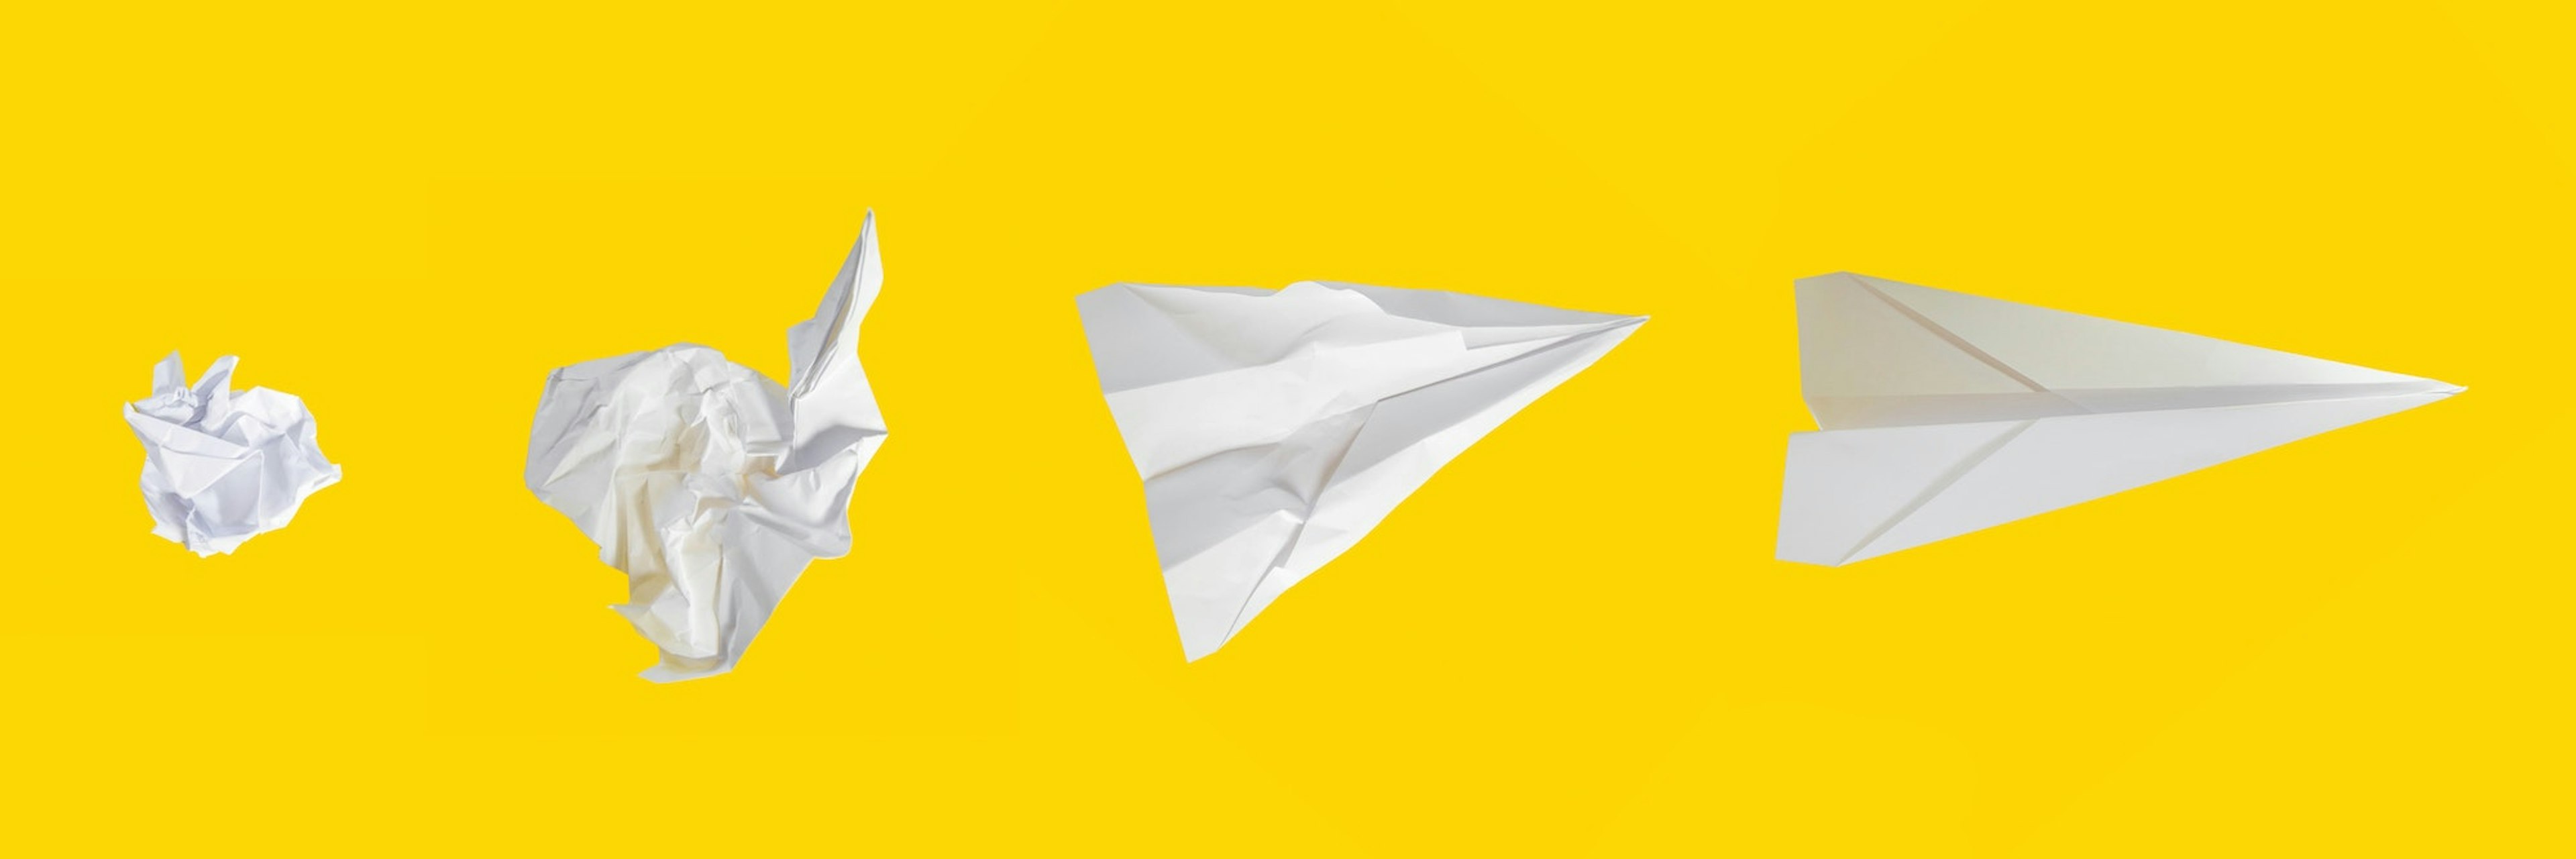 crumpled paper and paper airplane